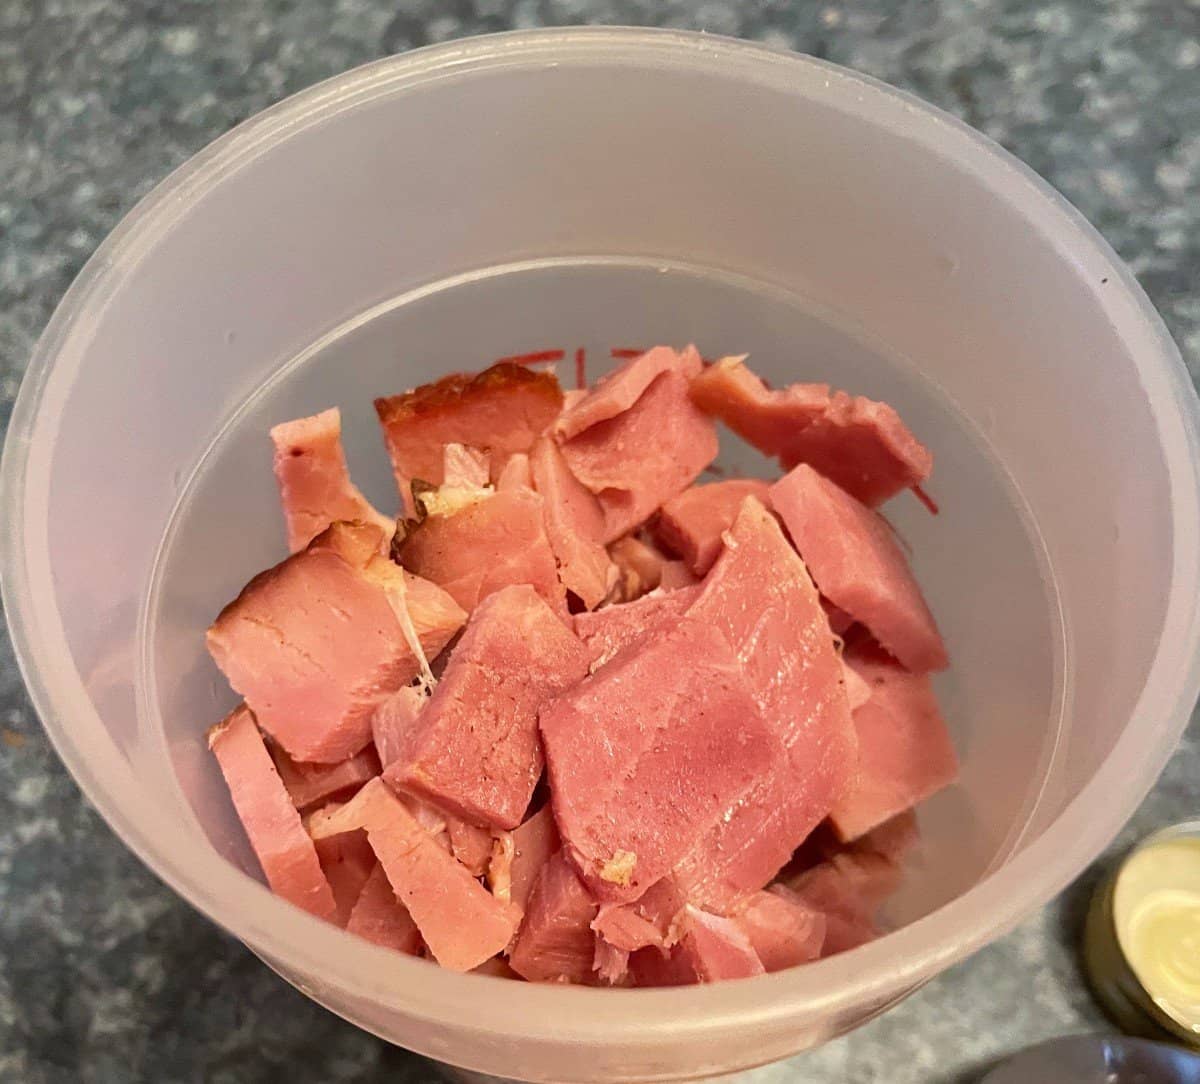 leftover ham in a measuring cup, cut into bite sized pieces.